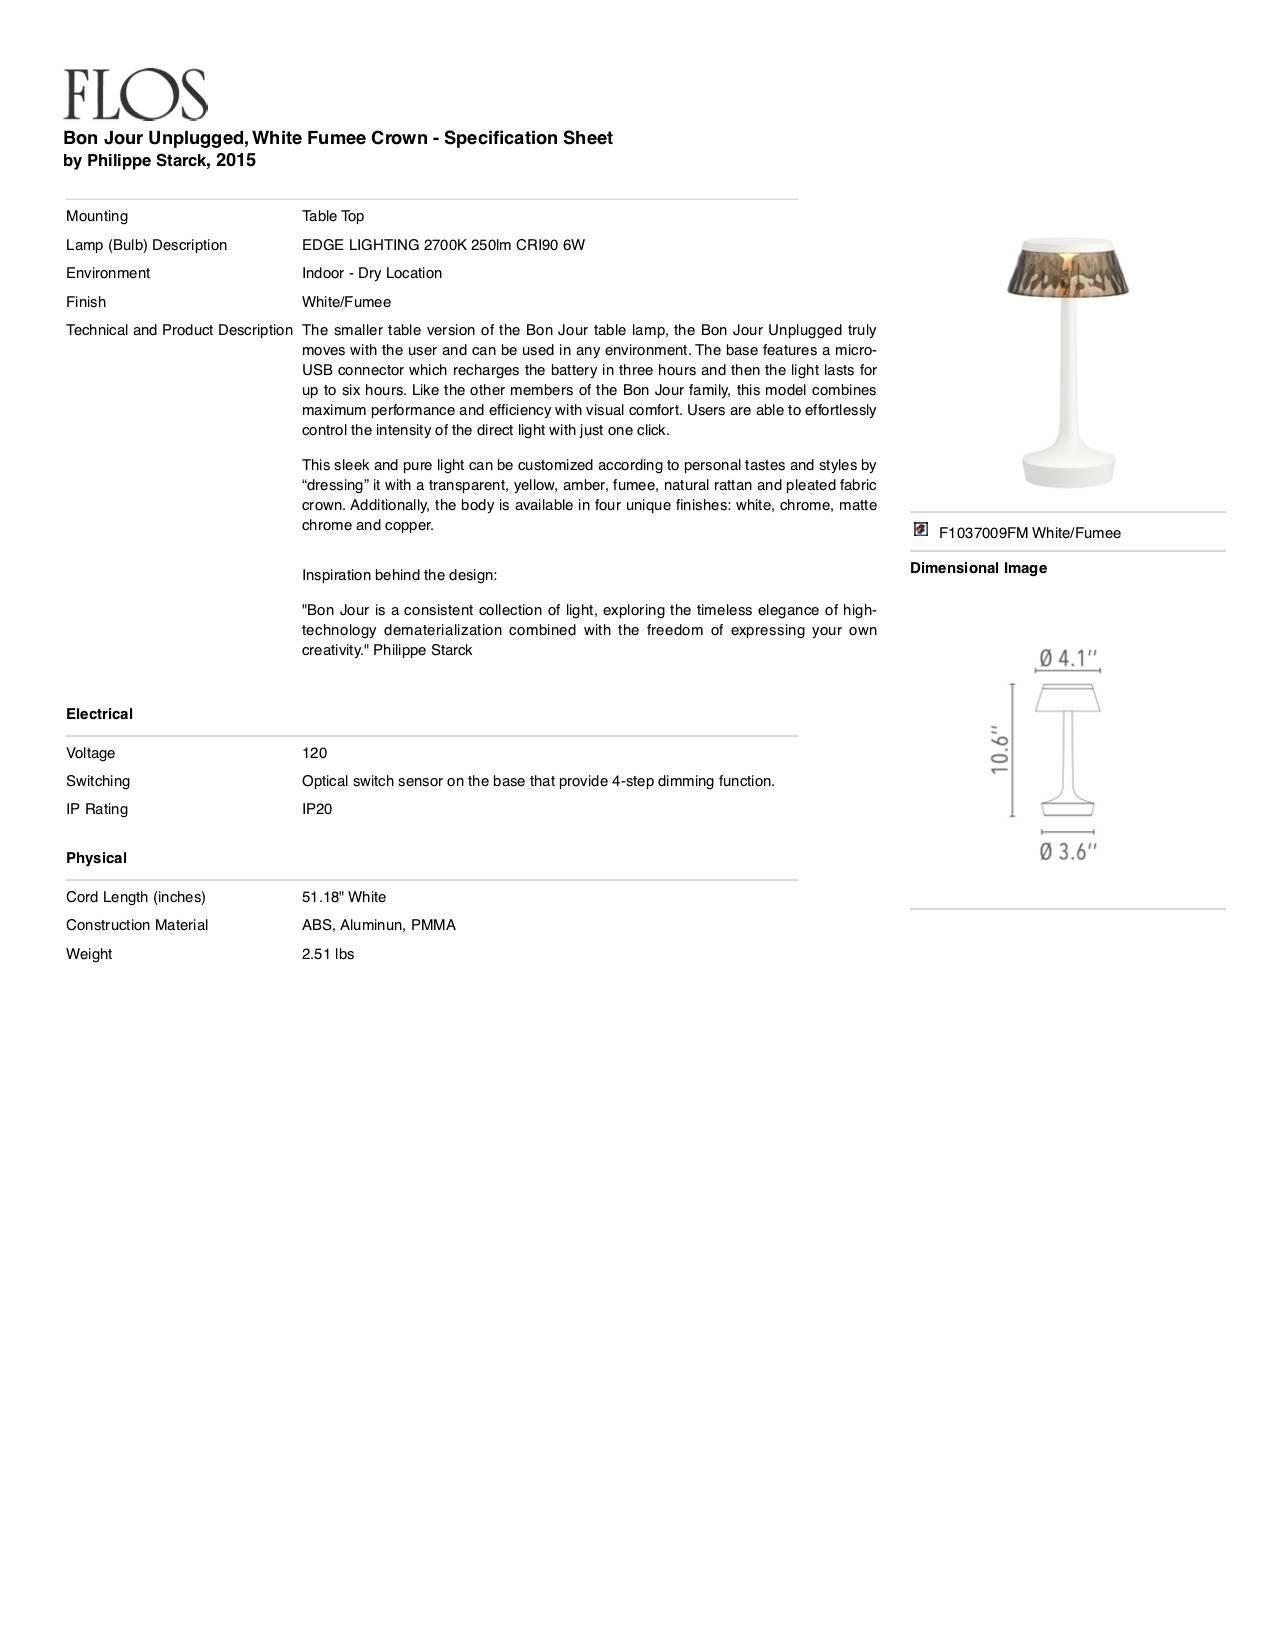 Italian FLOS Bon Jour Unplugged White Lamp w/ Fumee Crown by Philippe Starck For Sale